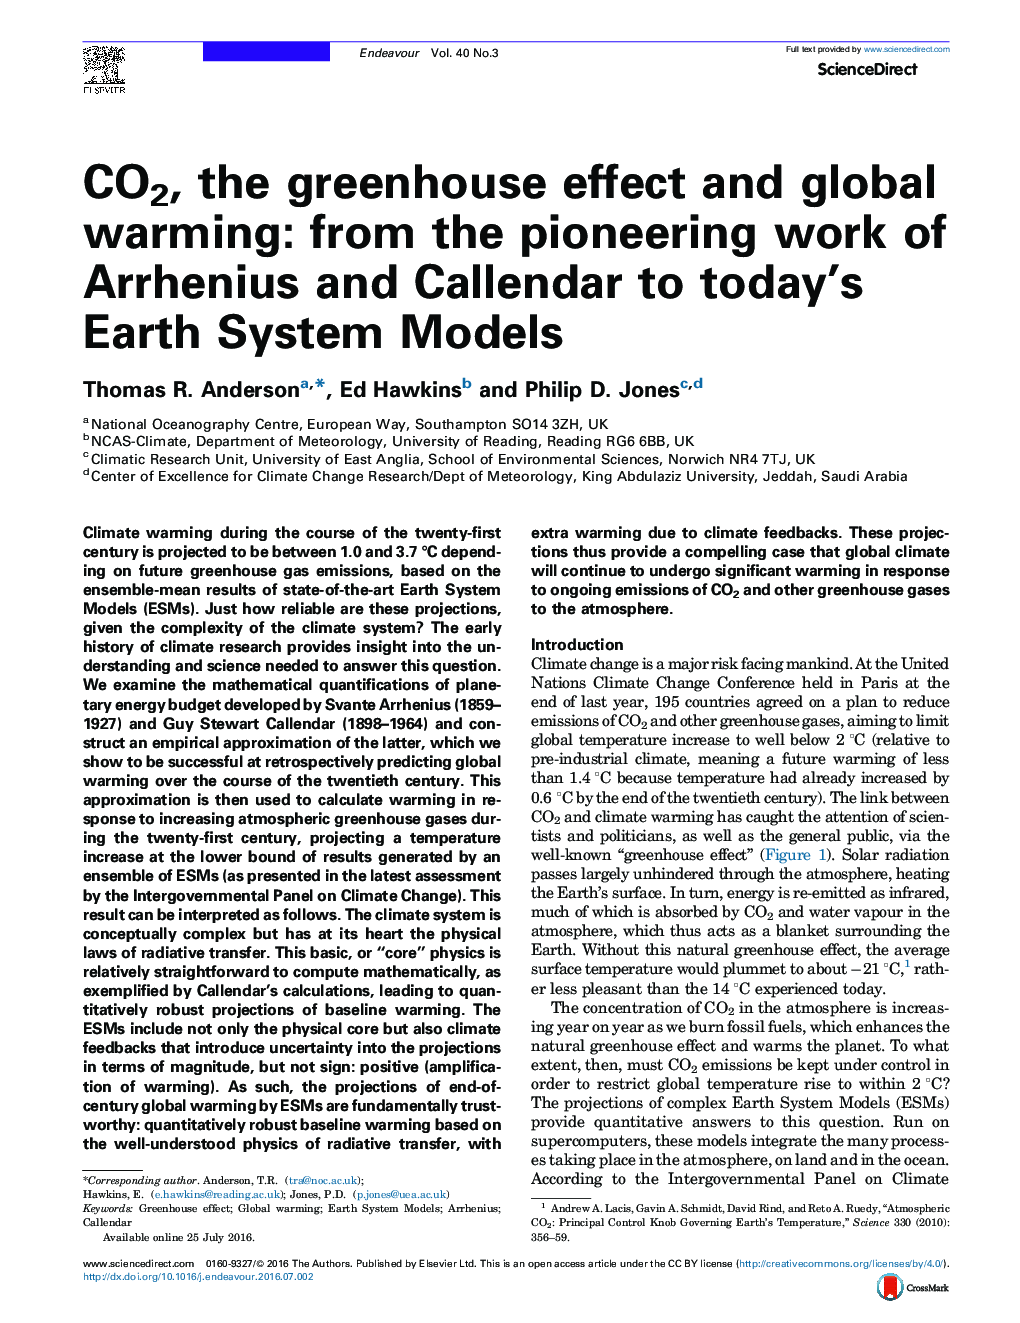 CO2, the greenhouse effect and global warming: from the pioneering work of Arrhenius and Callendar to today's Earth System Models